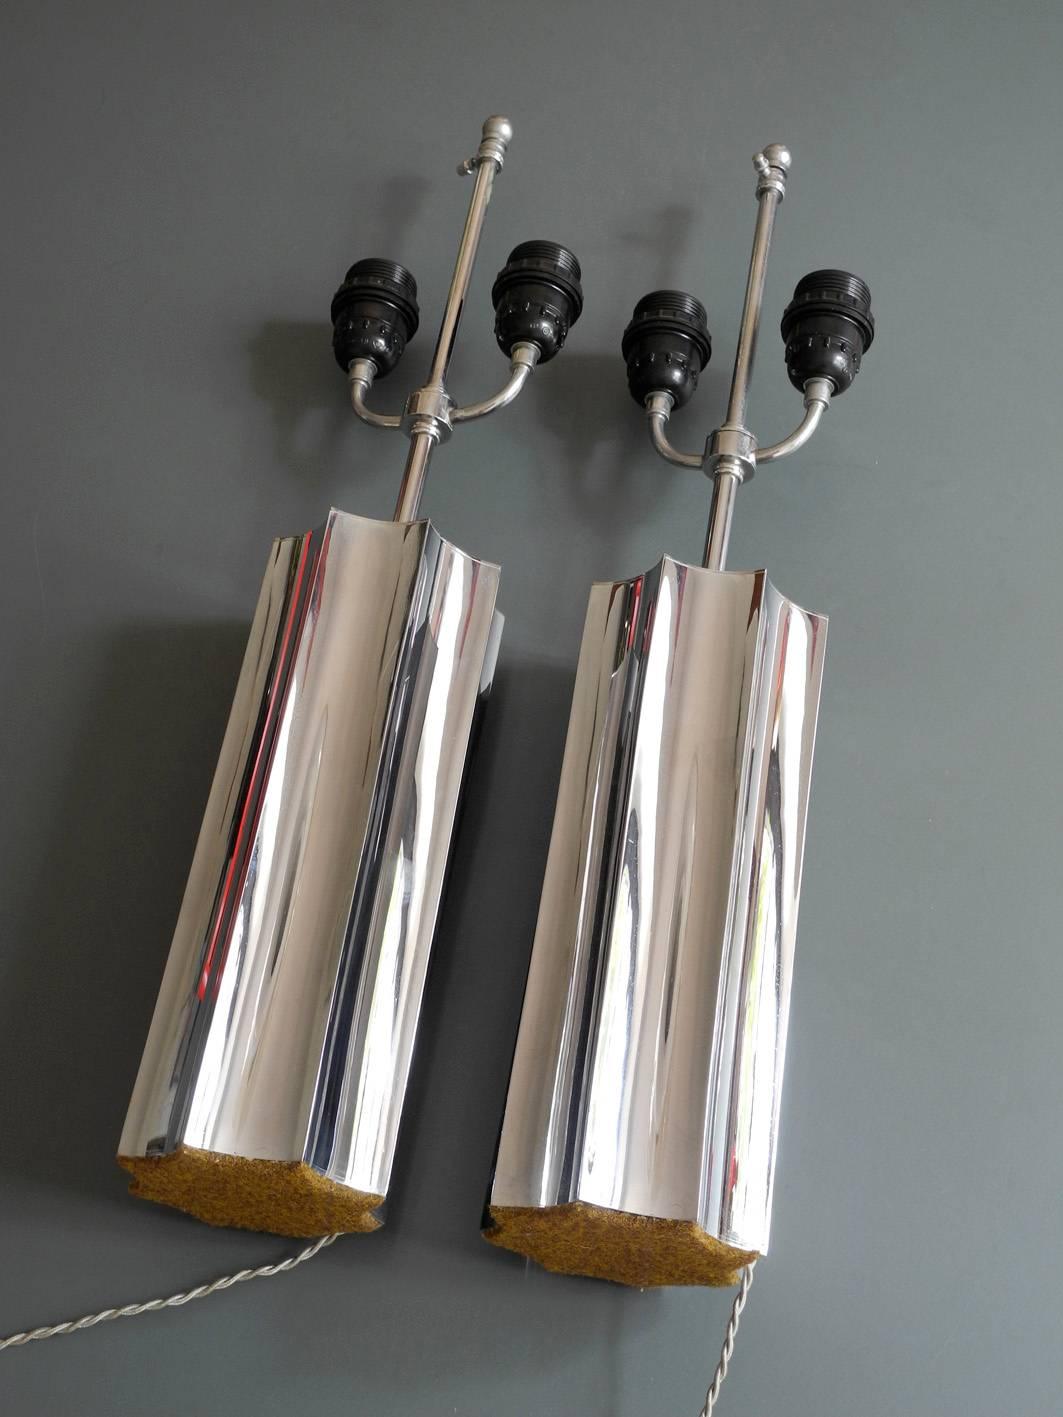 Wo big and beautiful 1960s chrome table lamp bases / feet.
Very nice design and quality. Solid metal with chrome.
The two bases have E27 sockets. Lampshades are not available.
There are screws on the sockets for attaching new lampshades.
The bar